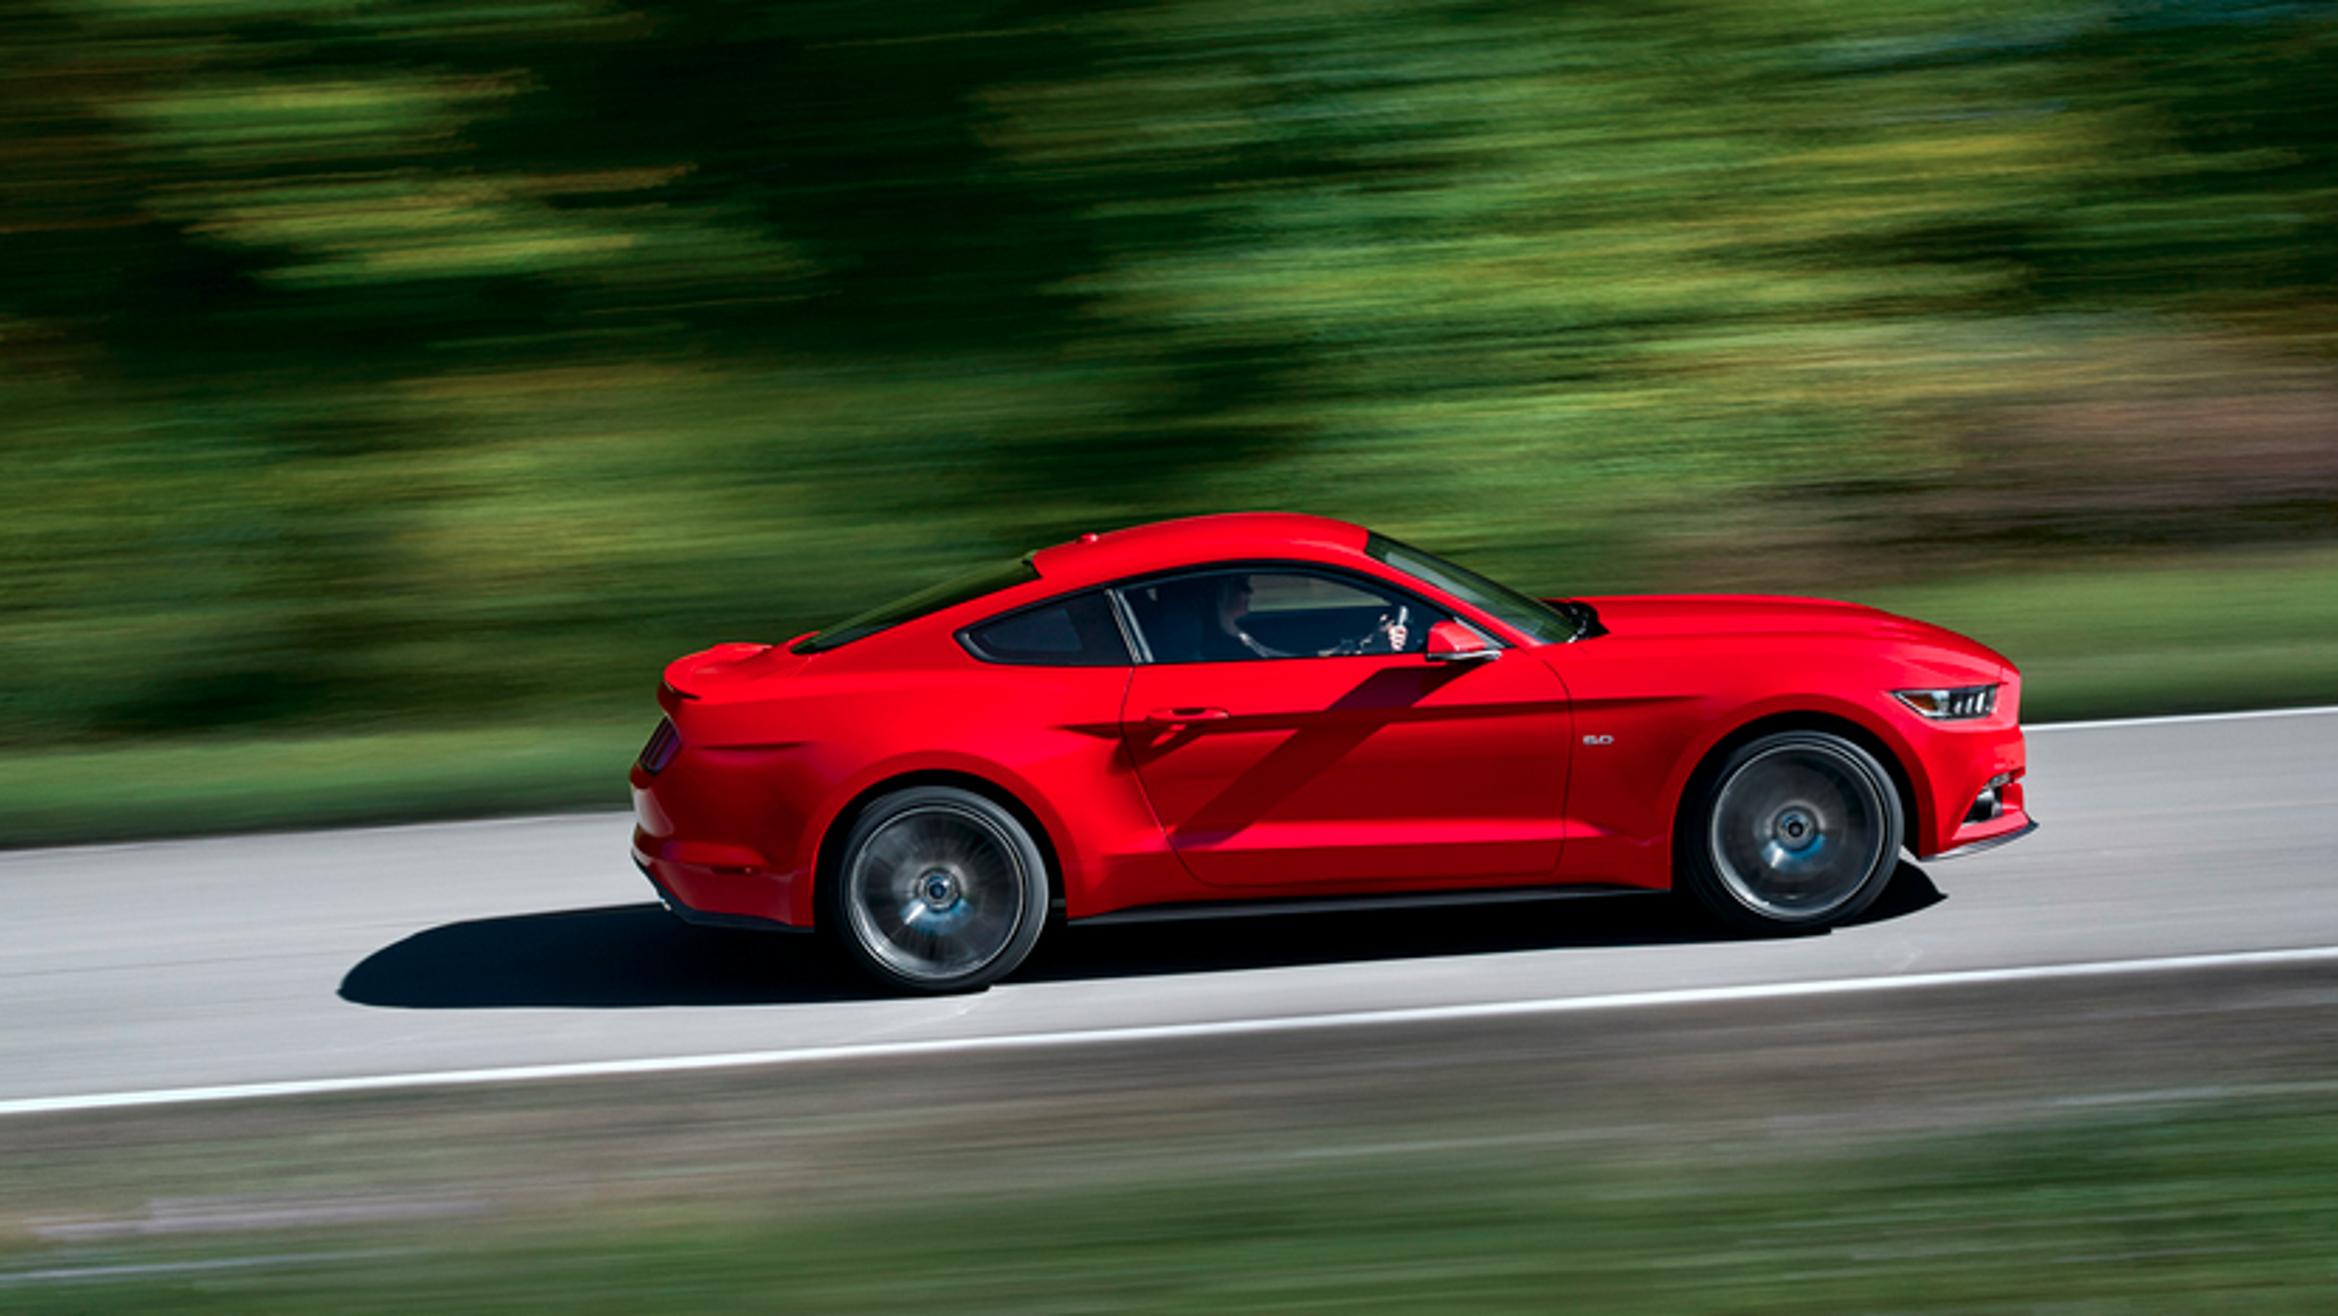 The Ford Mustang is the World's Best-Selling Sports Car in 2015 So Far